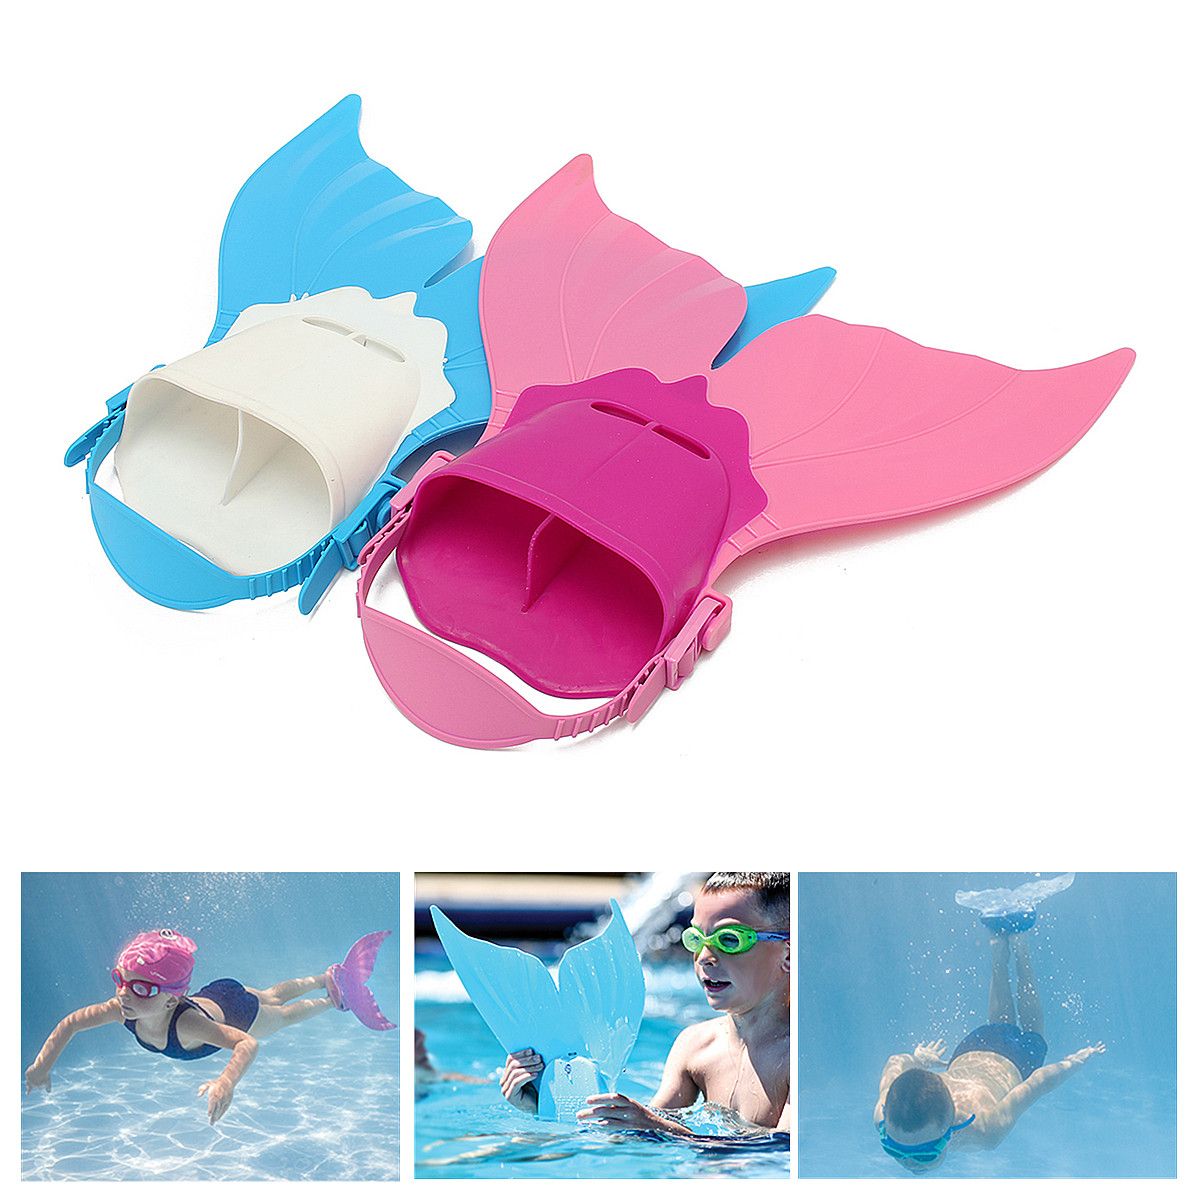 Kids-Mermaid-Tail-Swimming-Fin-Foot-Training-Flipper-Shoes-Monofin-Diving-Flippers-1453426